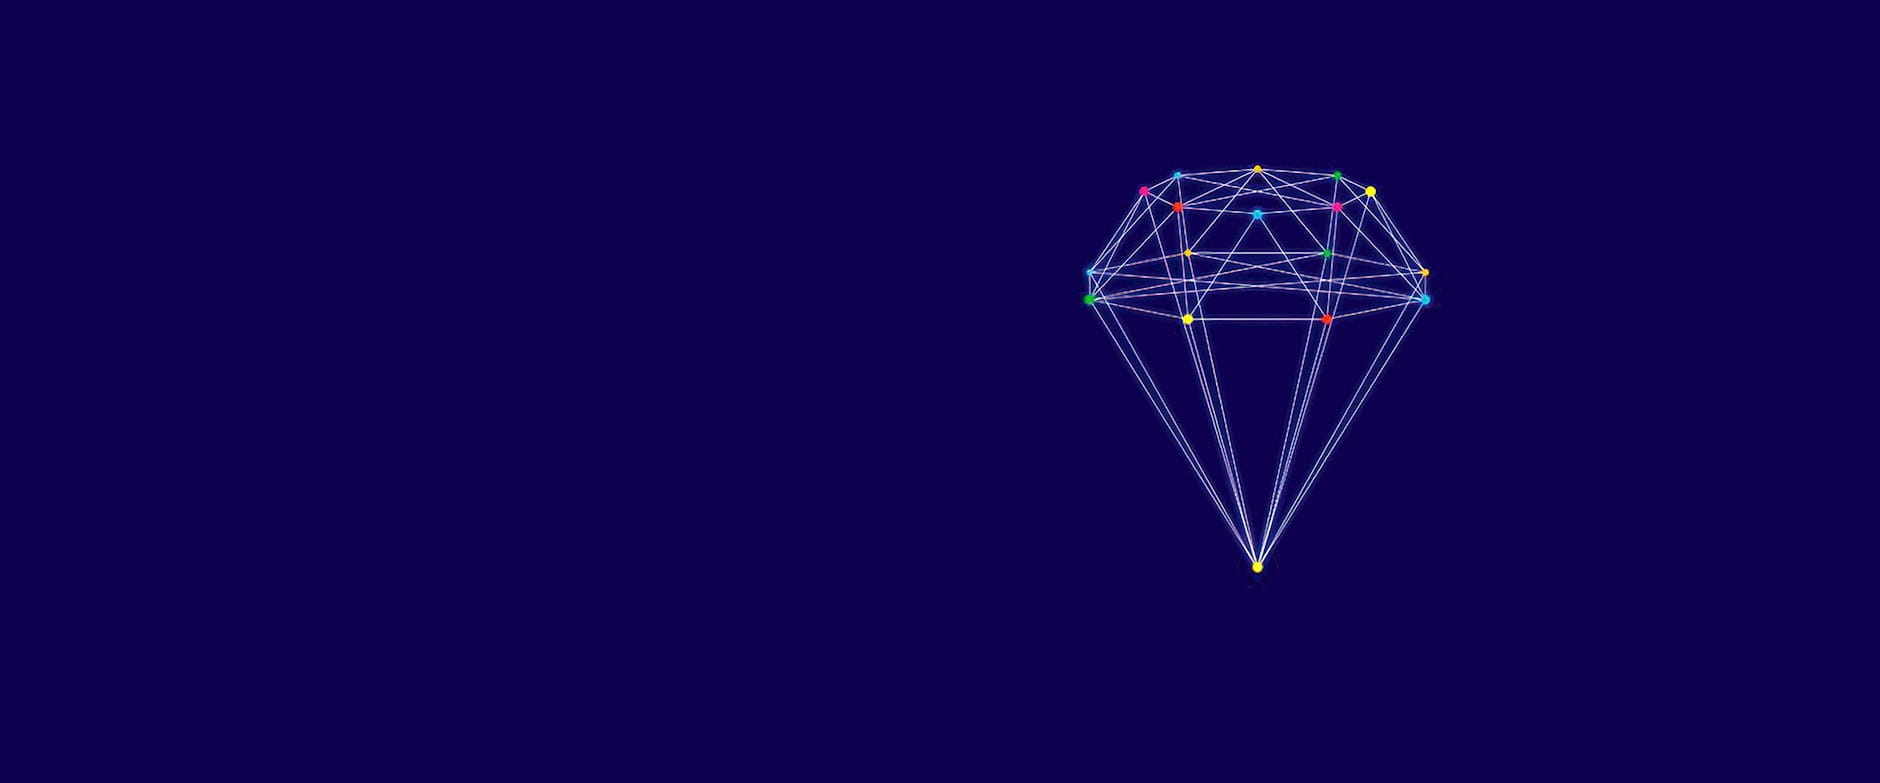 Network connections in the shape of a diamond